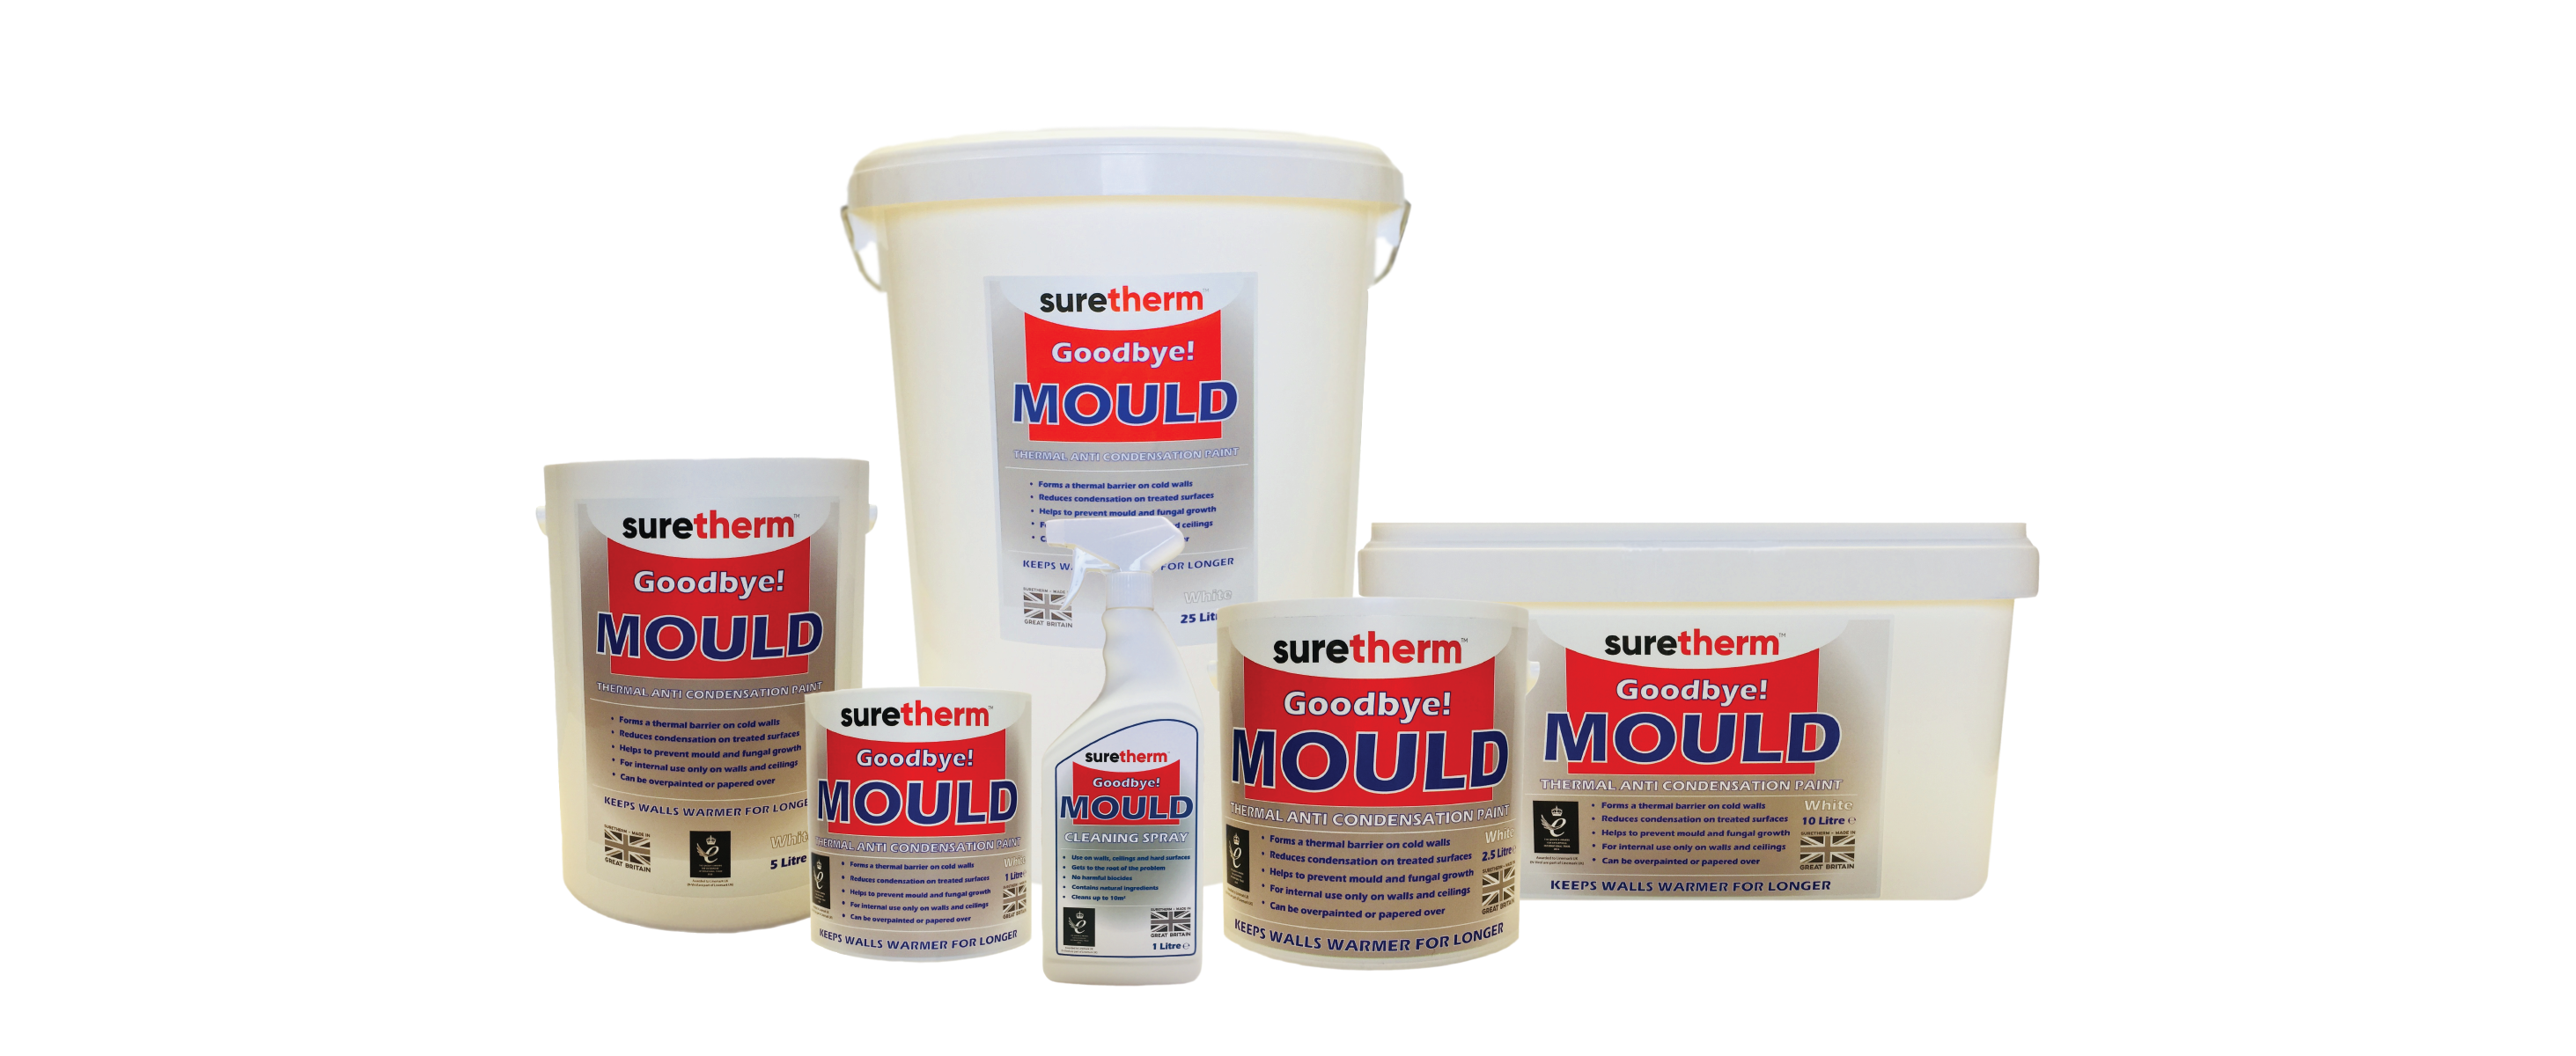 Where to buy Suretherm products